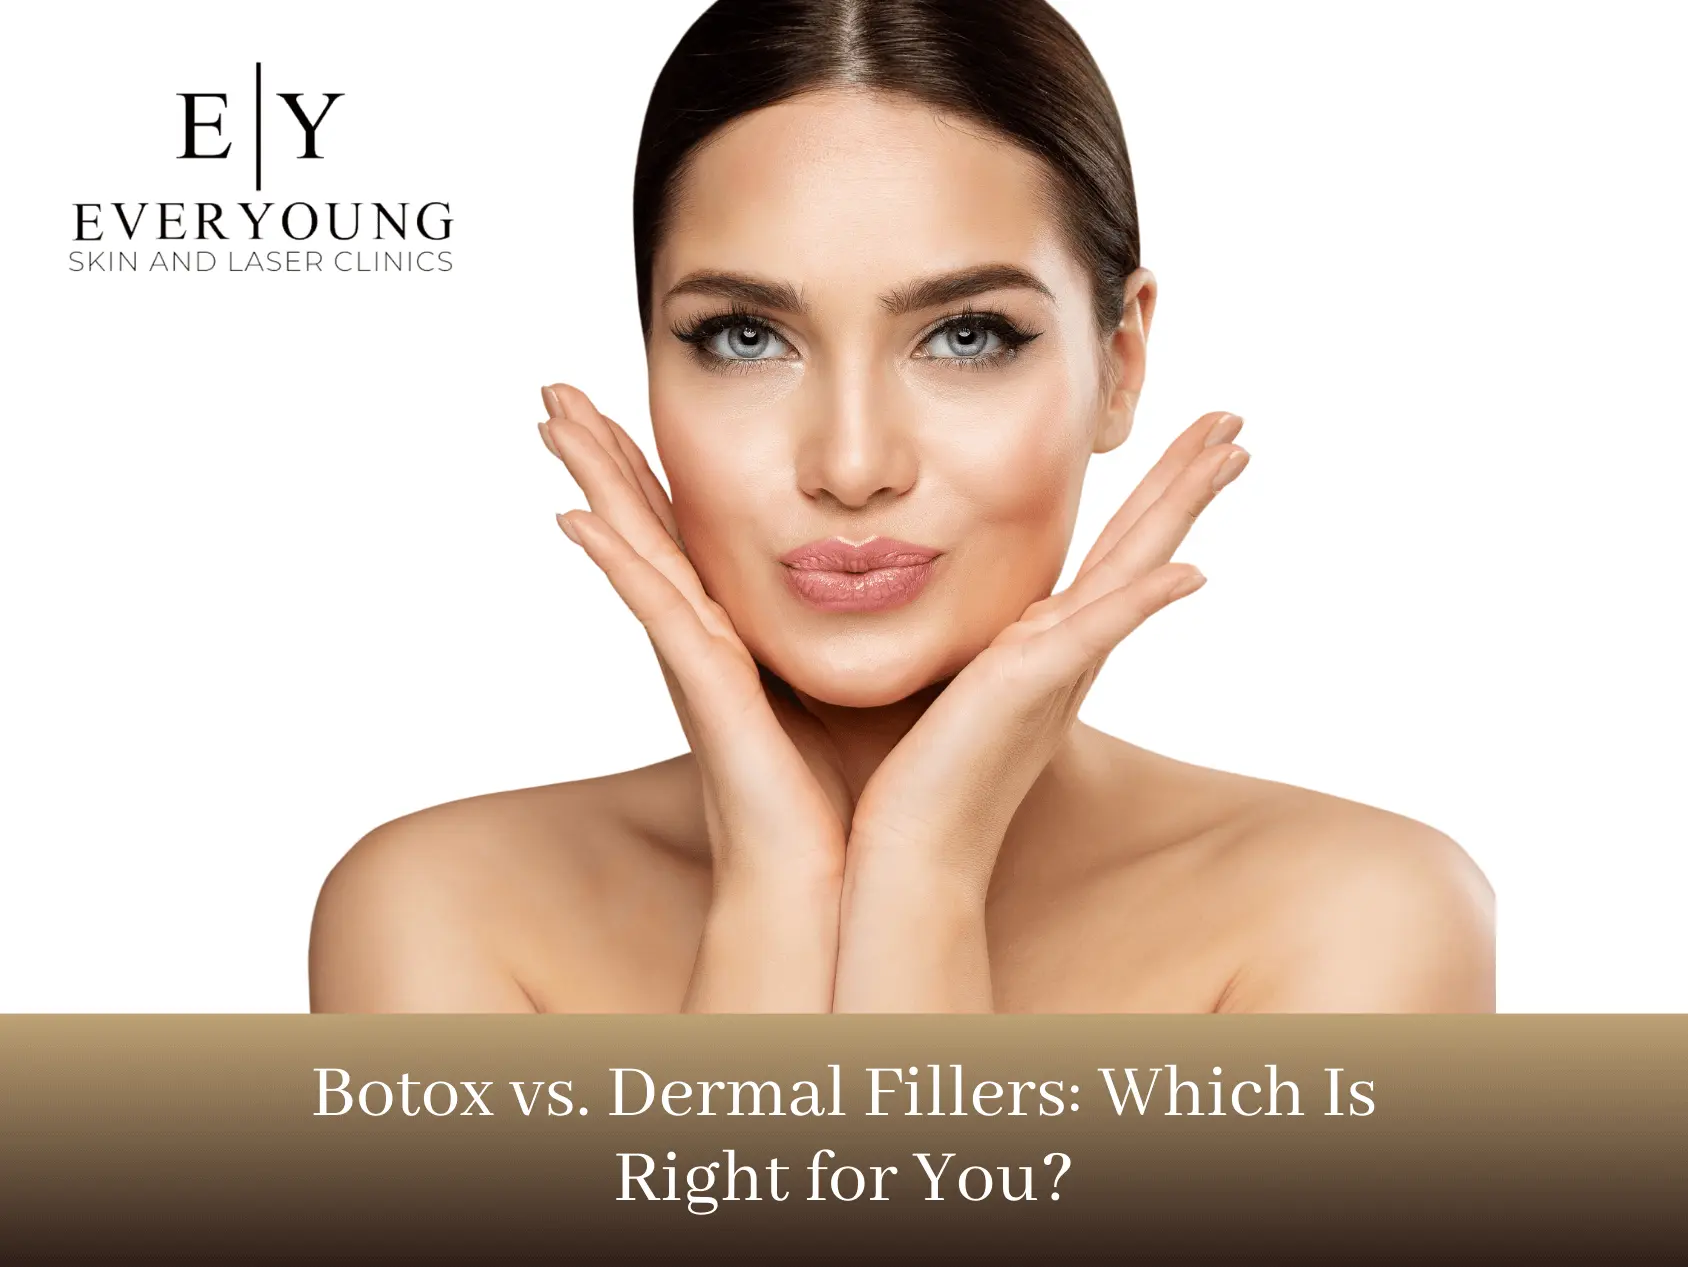 Botox vs Dermal fillers what is right for you